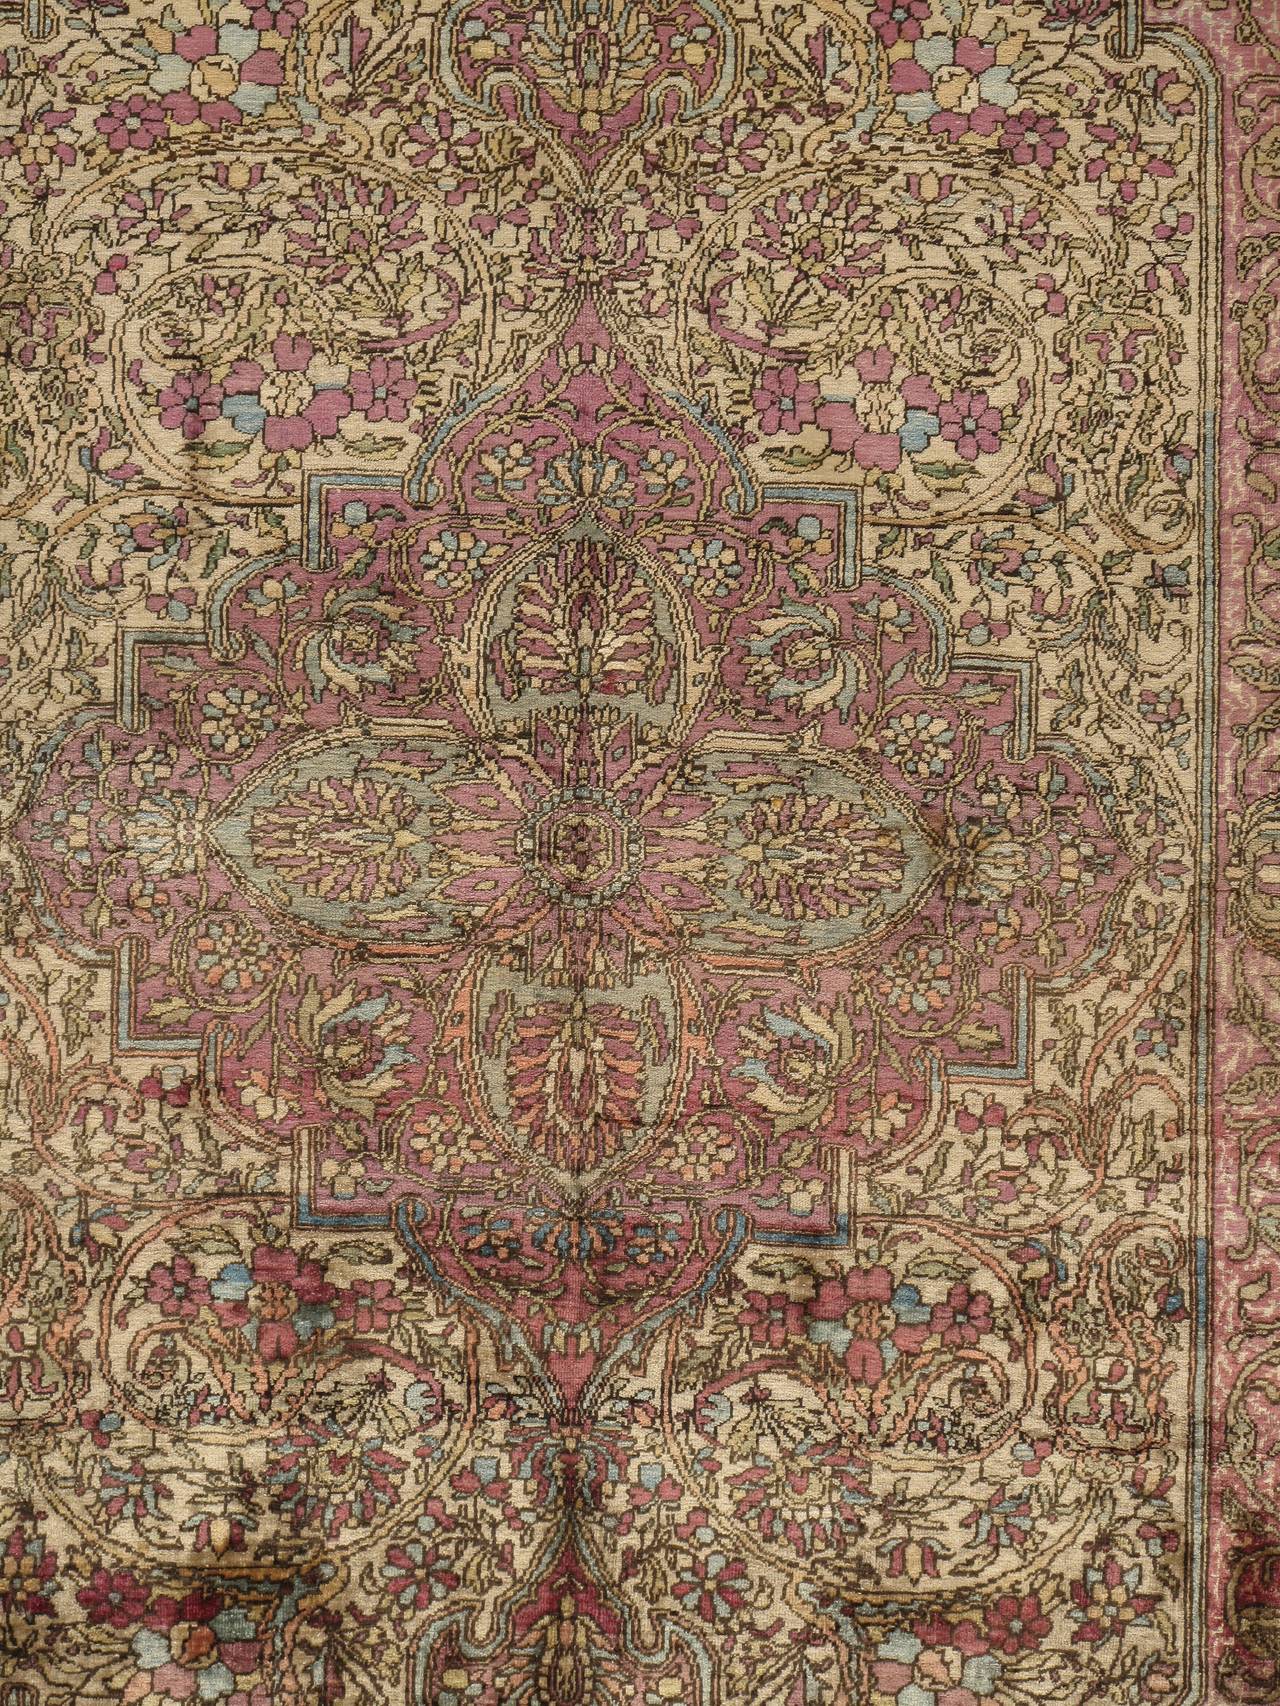 For a brief period in the later 19th century there was a small production of highly desirable silk rugs from the town of Feraghan in Arak province in northwest Persia which represented the crème de la crème of local weaving. Because they were a